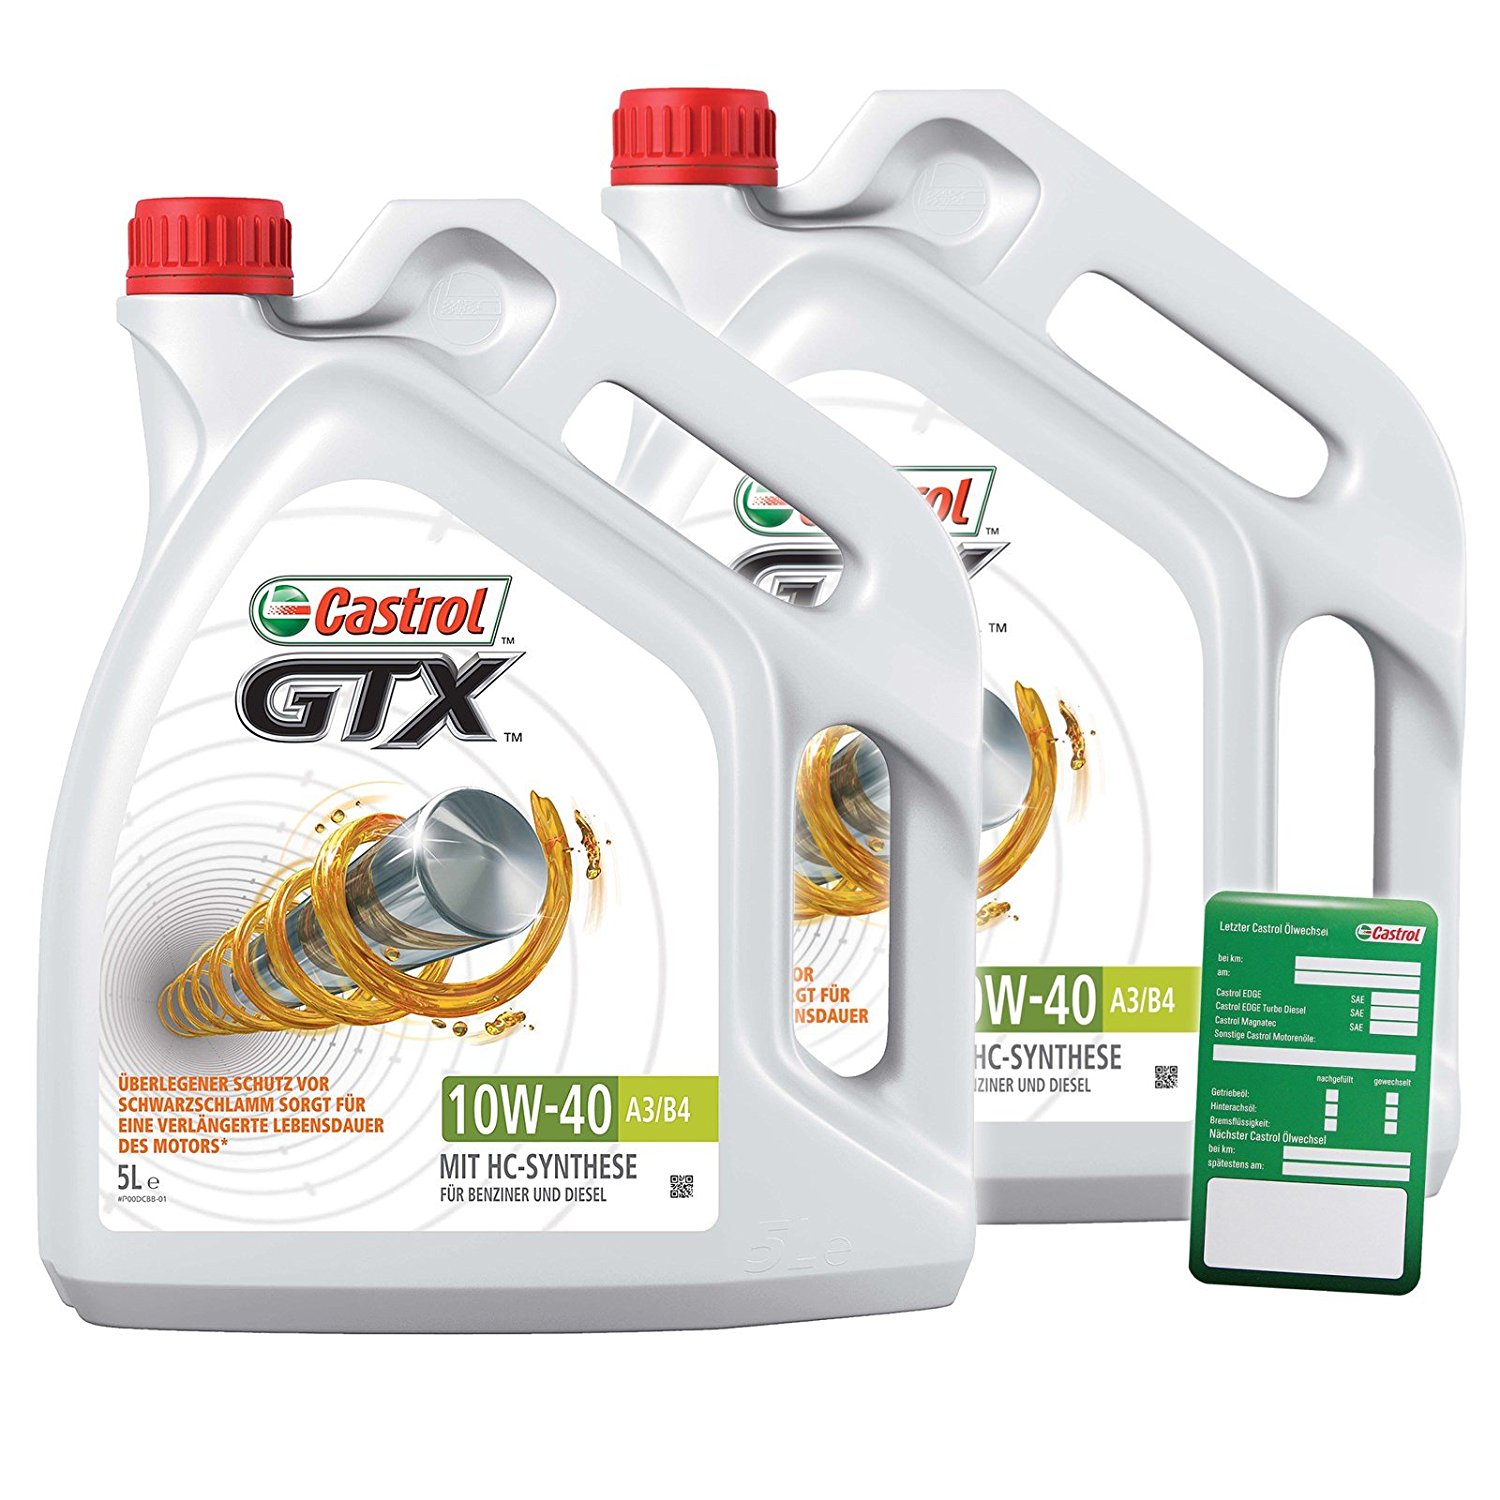 Acea a3. Моторное масло Castrol GTX 10w-40 a3/b3 4 л. Castrol GTX a3/b3_15w40_5 л. Моторное масло Castrol GTX 5w-40 a3/b4. Моторное масло Castrol GTX 3 Protection+ 15w-40 4 л.